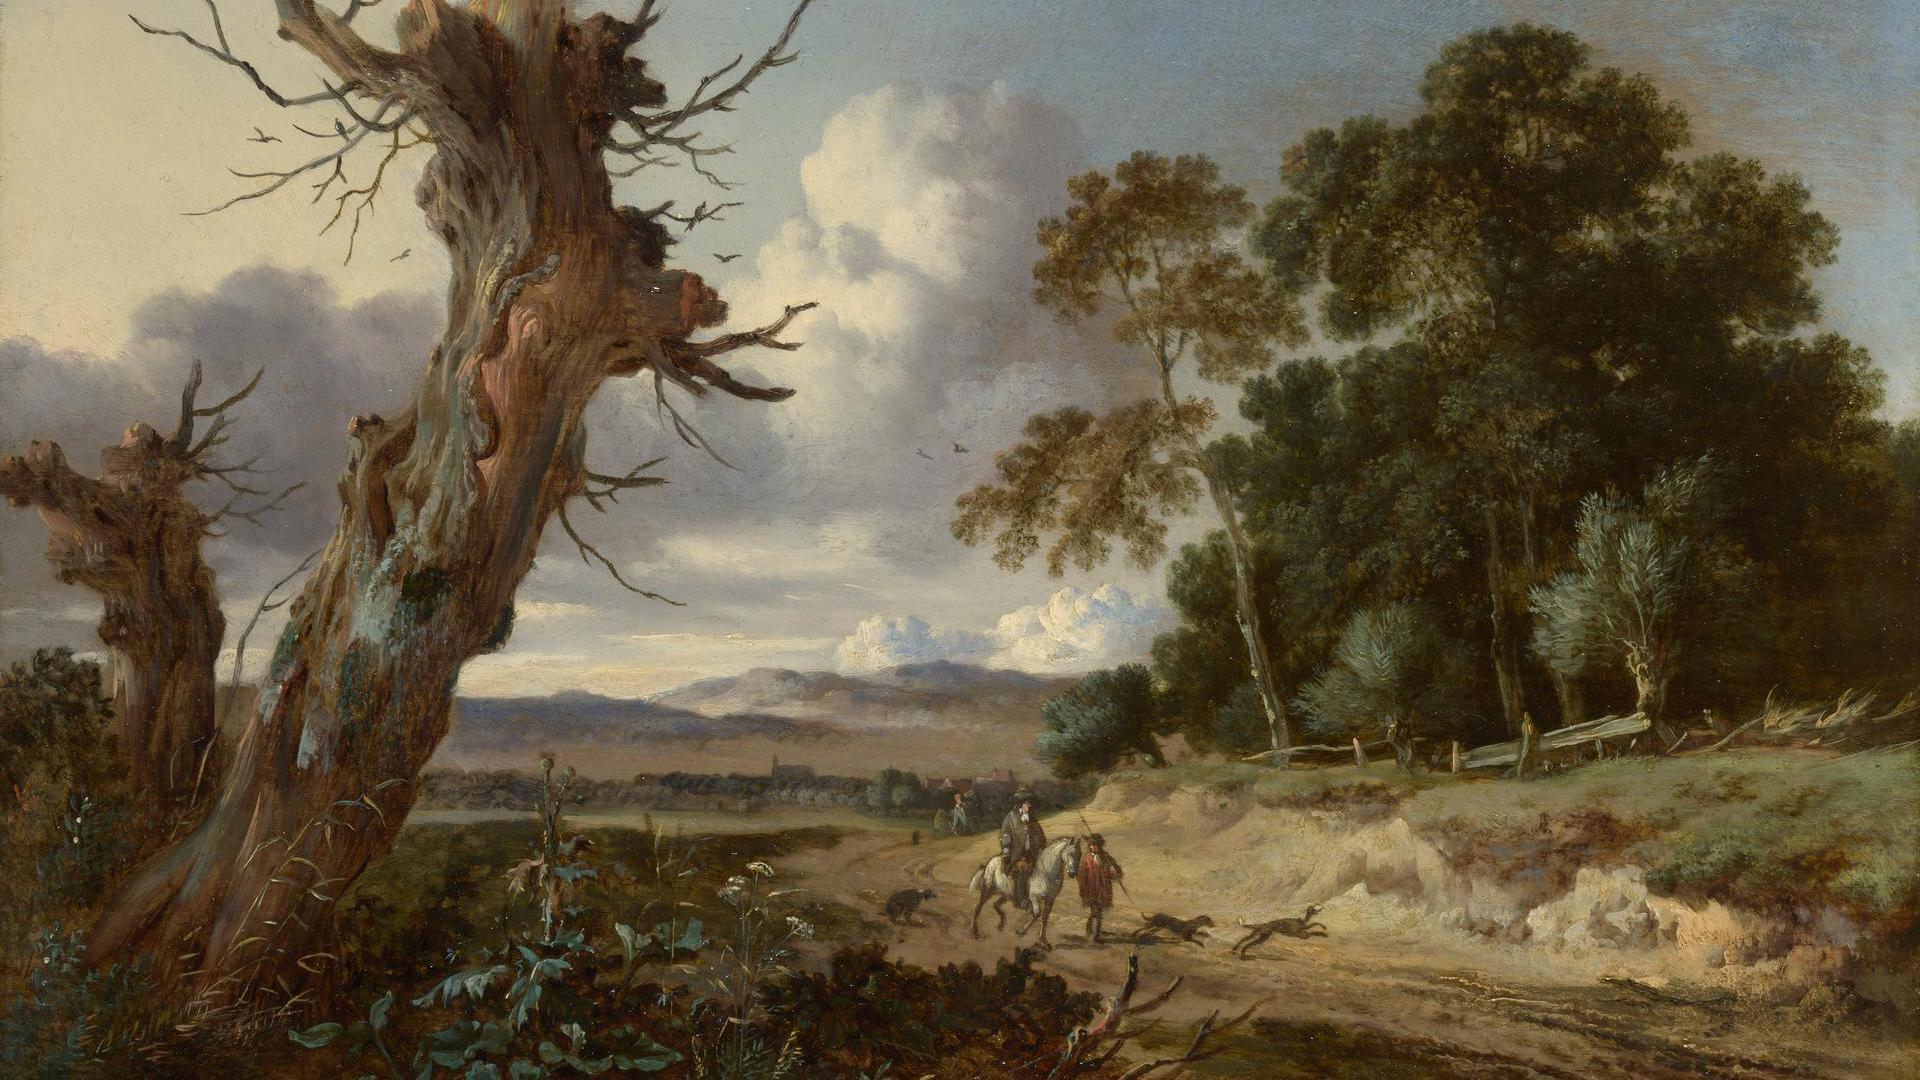 A Landscape with Two Dead Trees by Jan Wijnants